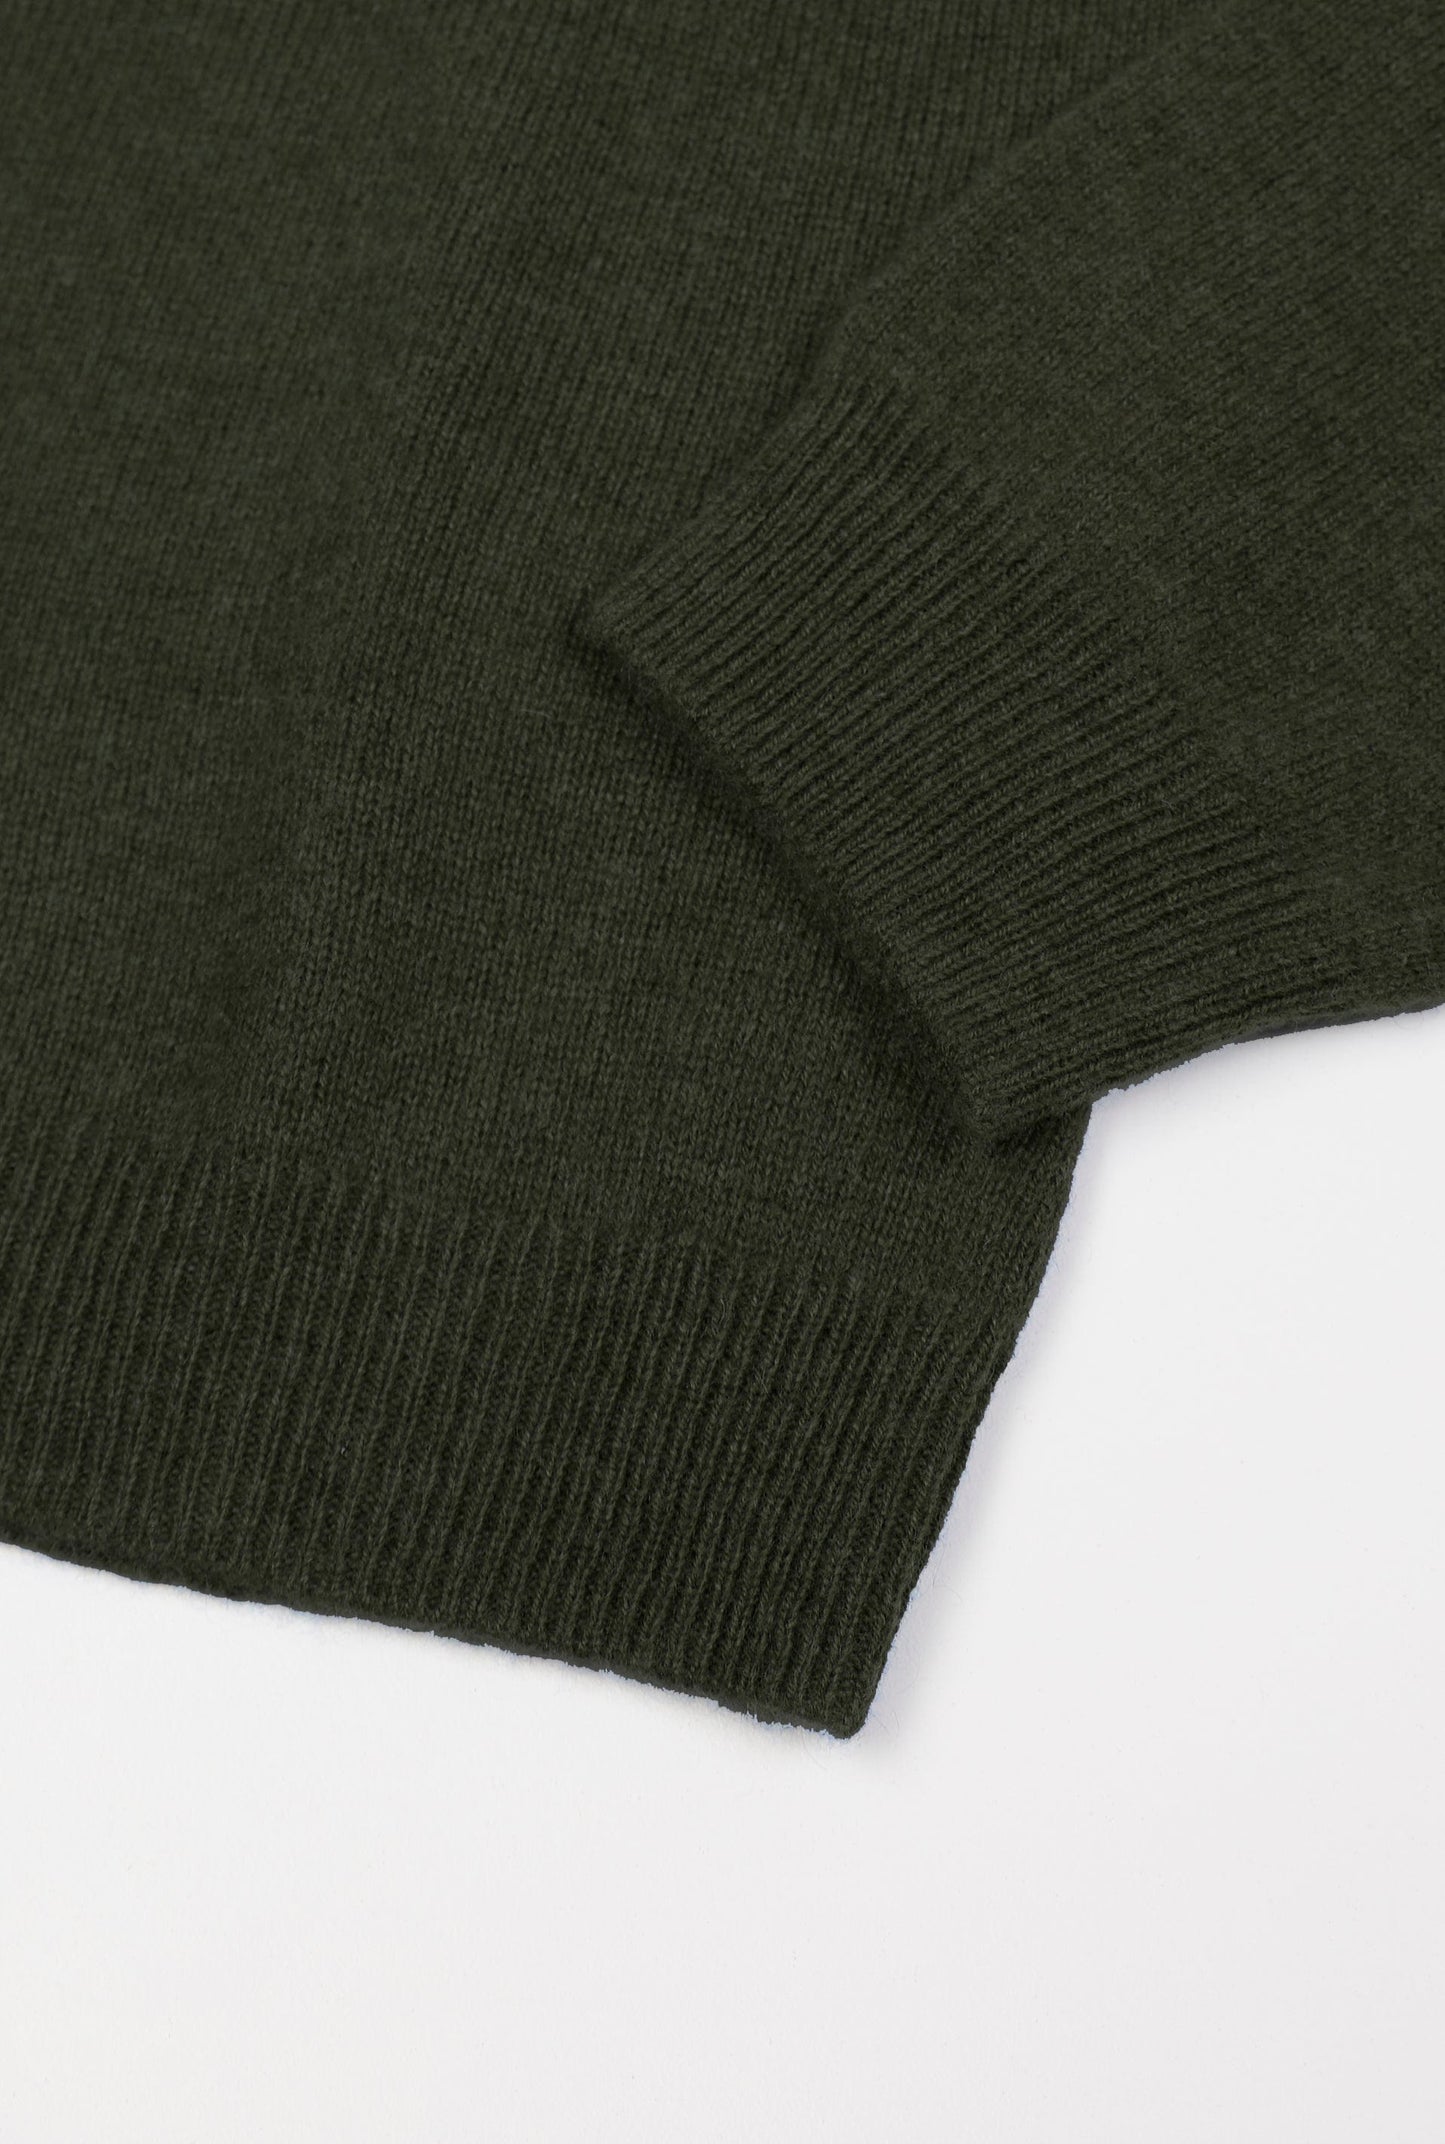 Cashmere Cardigan in Highland Green